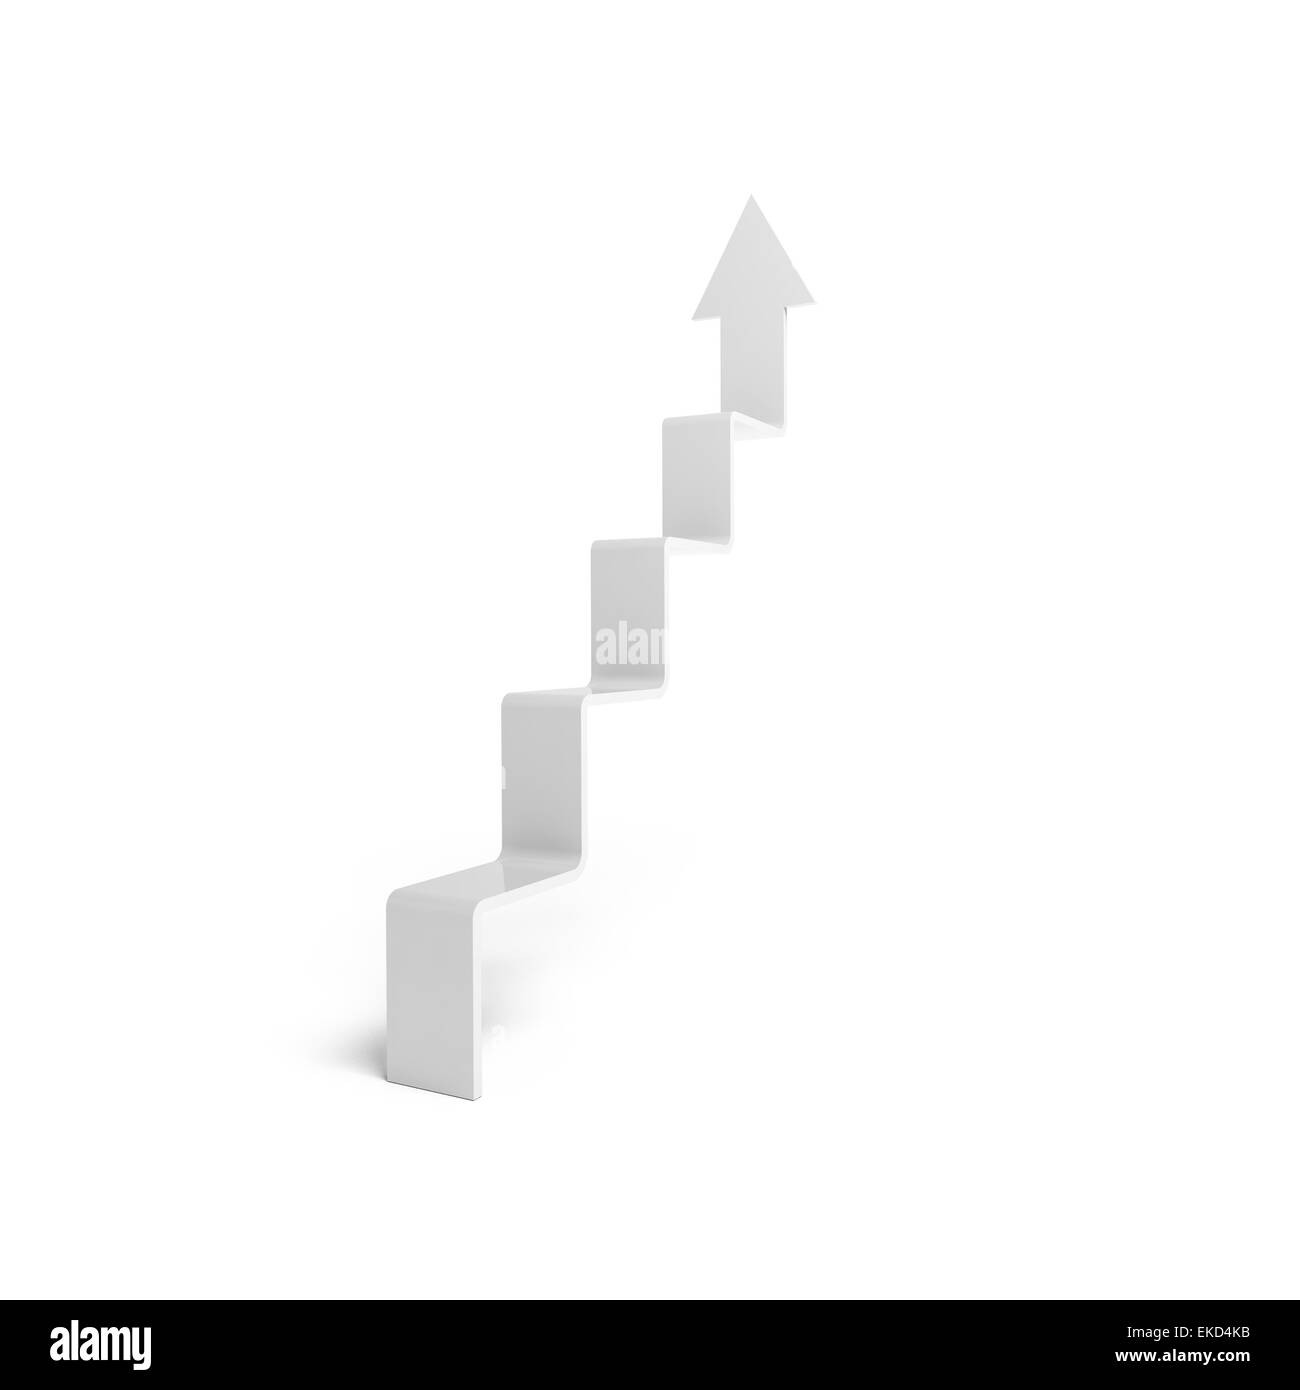 3d arrow in shape of stairway going up, object isolated on white background Stock Photo